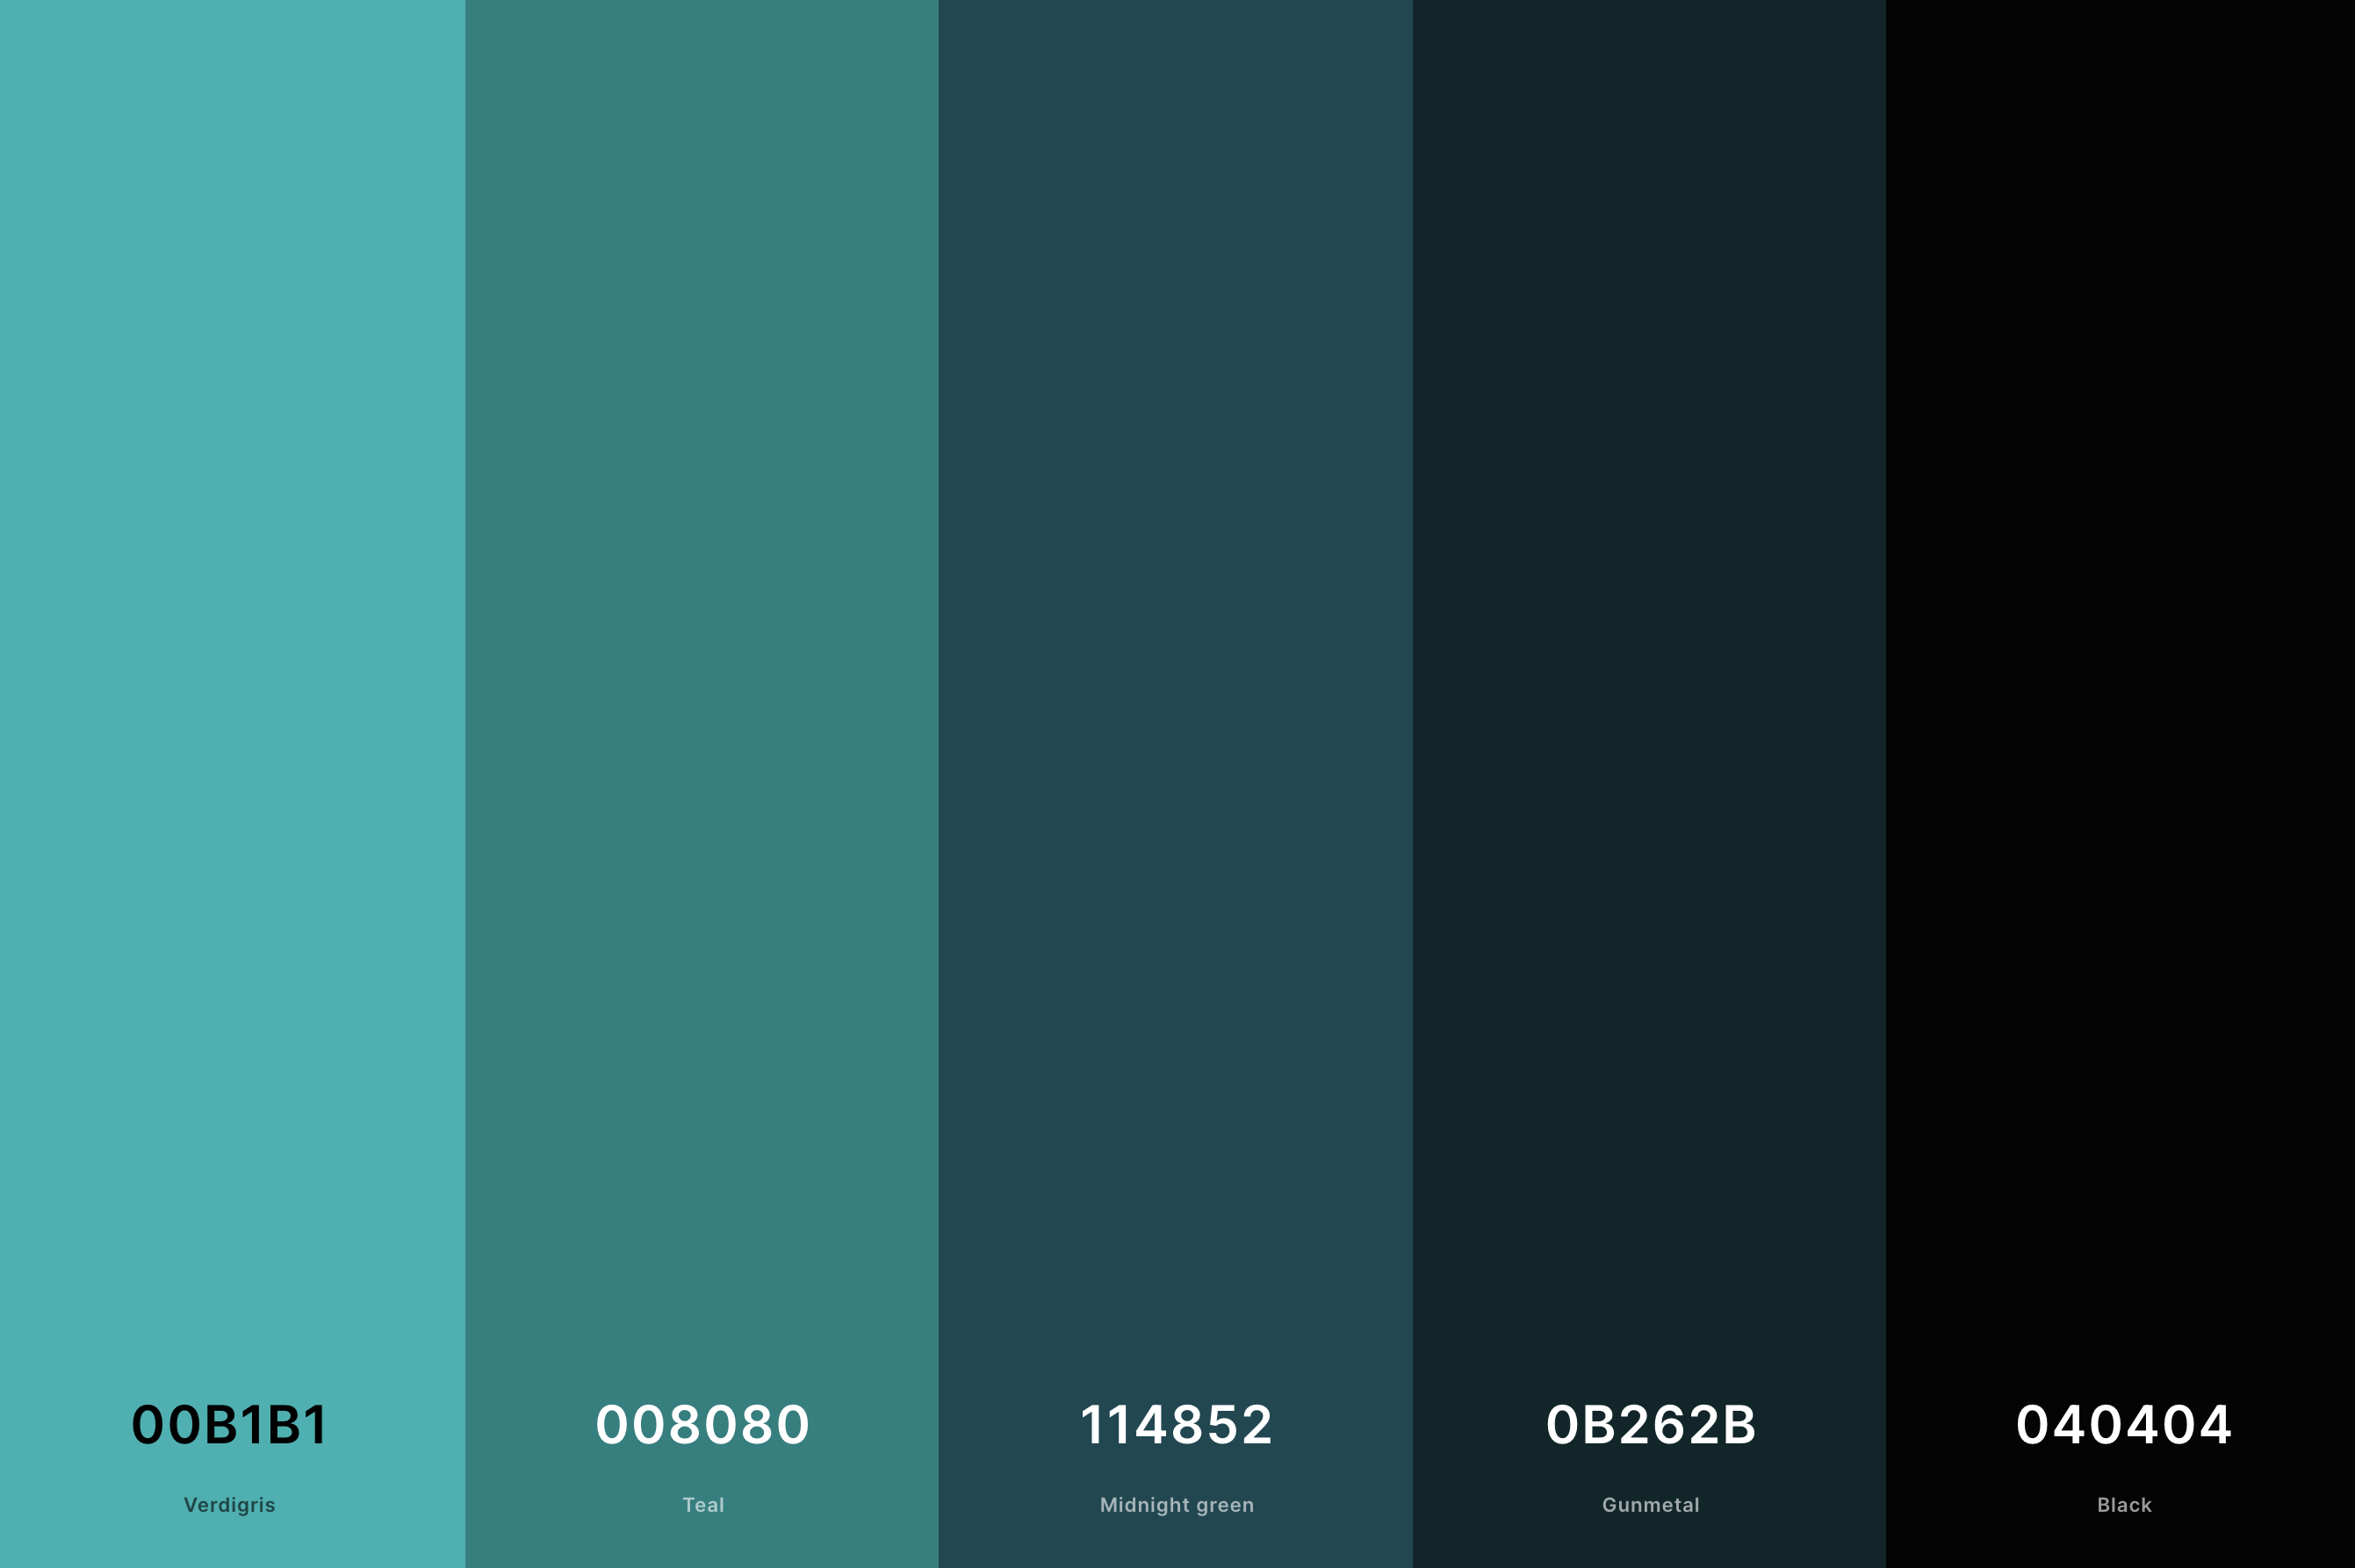 24. Black And Teal Color Palette Color Palette with Verdigris (Hex #00B1B1) + Teal (Hex #008080) + Midnight Green (Hex #114852) + Gunmetal (Hex #0B262B) + Black (Hex #040404) Color Palette with Hex Codes